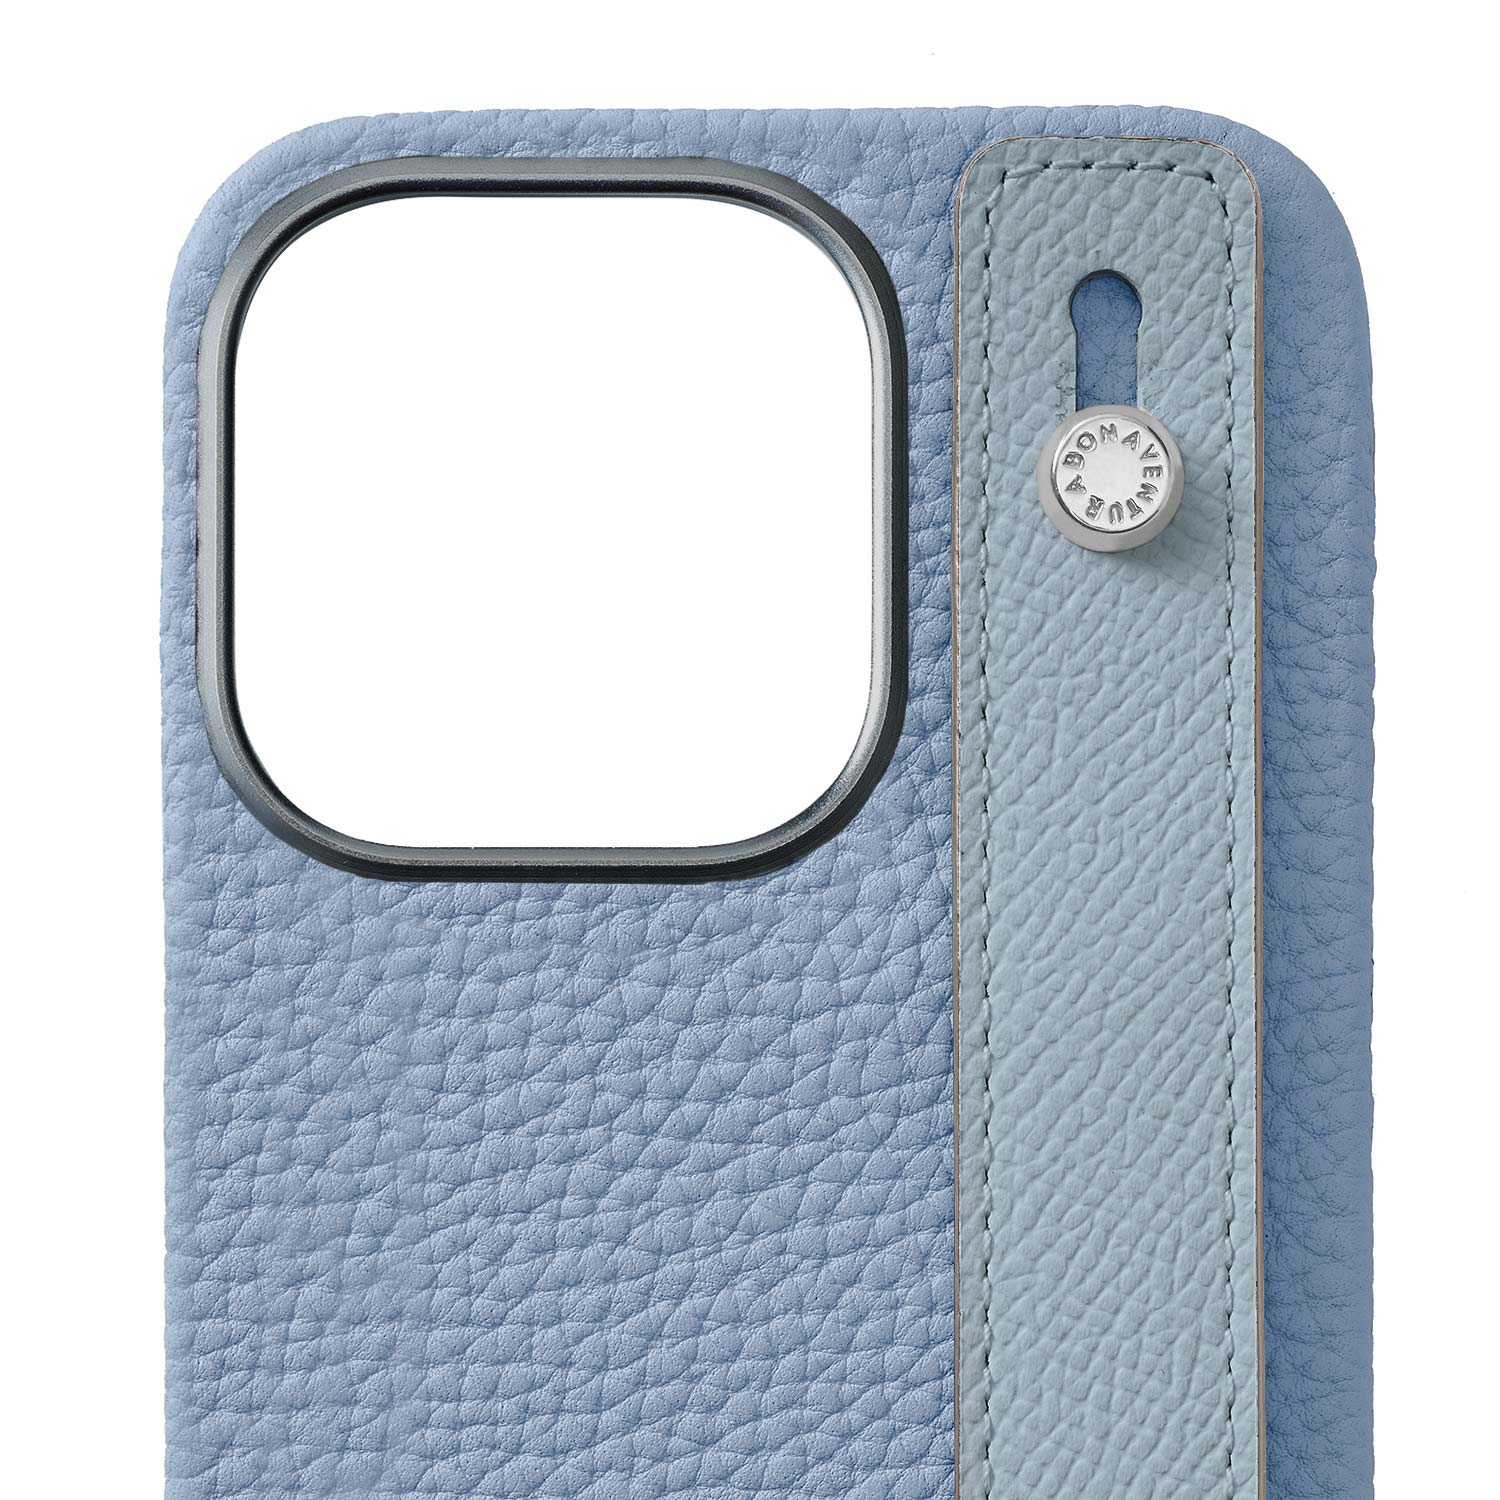 (iPhone 15 Pro) Back cover case with handle, shrink leather